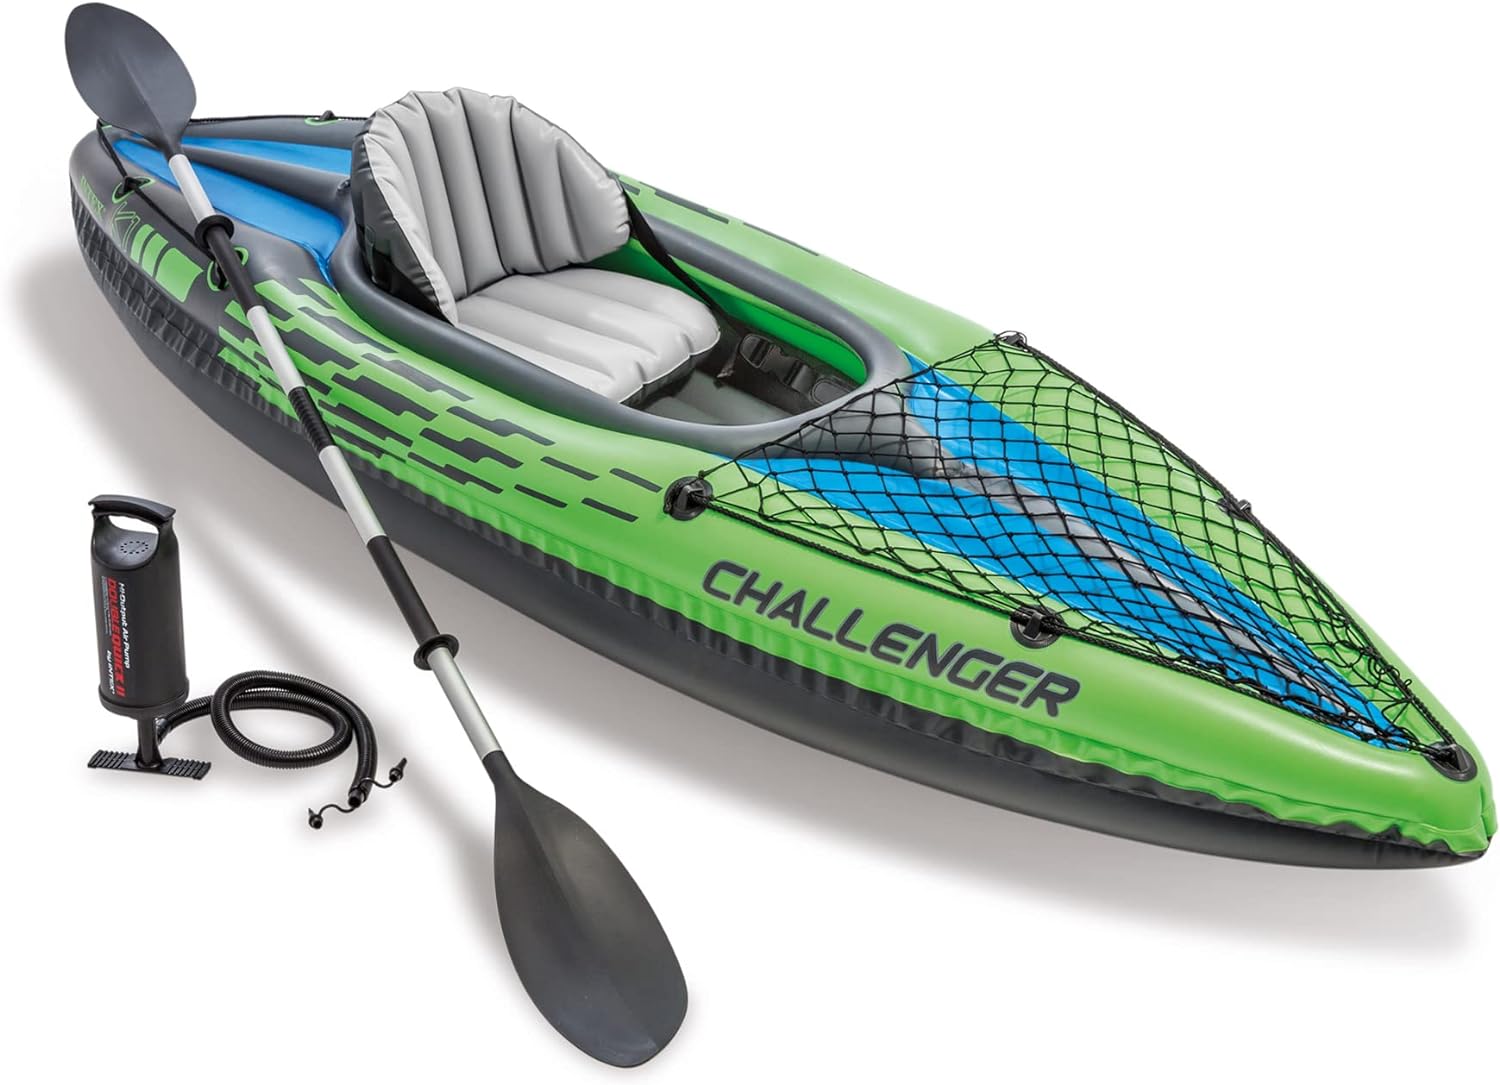 INTEX Challenger Inflatable Kayak Series: Includes Deluxe 86in Aluminum Oar and High-Output Pump – SuperStrong PVC – Adjustable Seat with Backrest – Removable Skeg – Cargo Storage Net - INTEX Challenger Inflatable Kayak Review